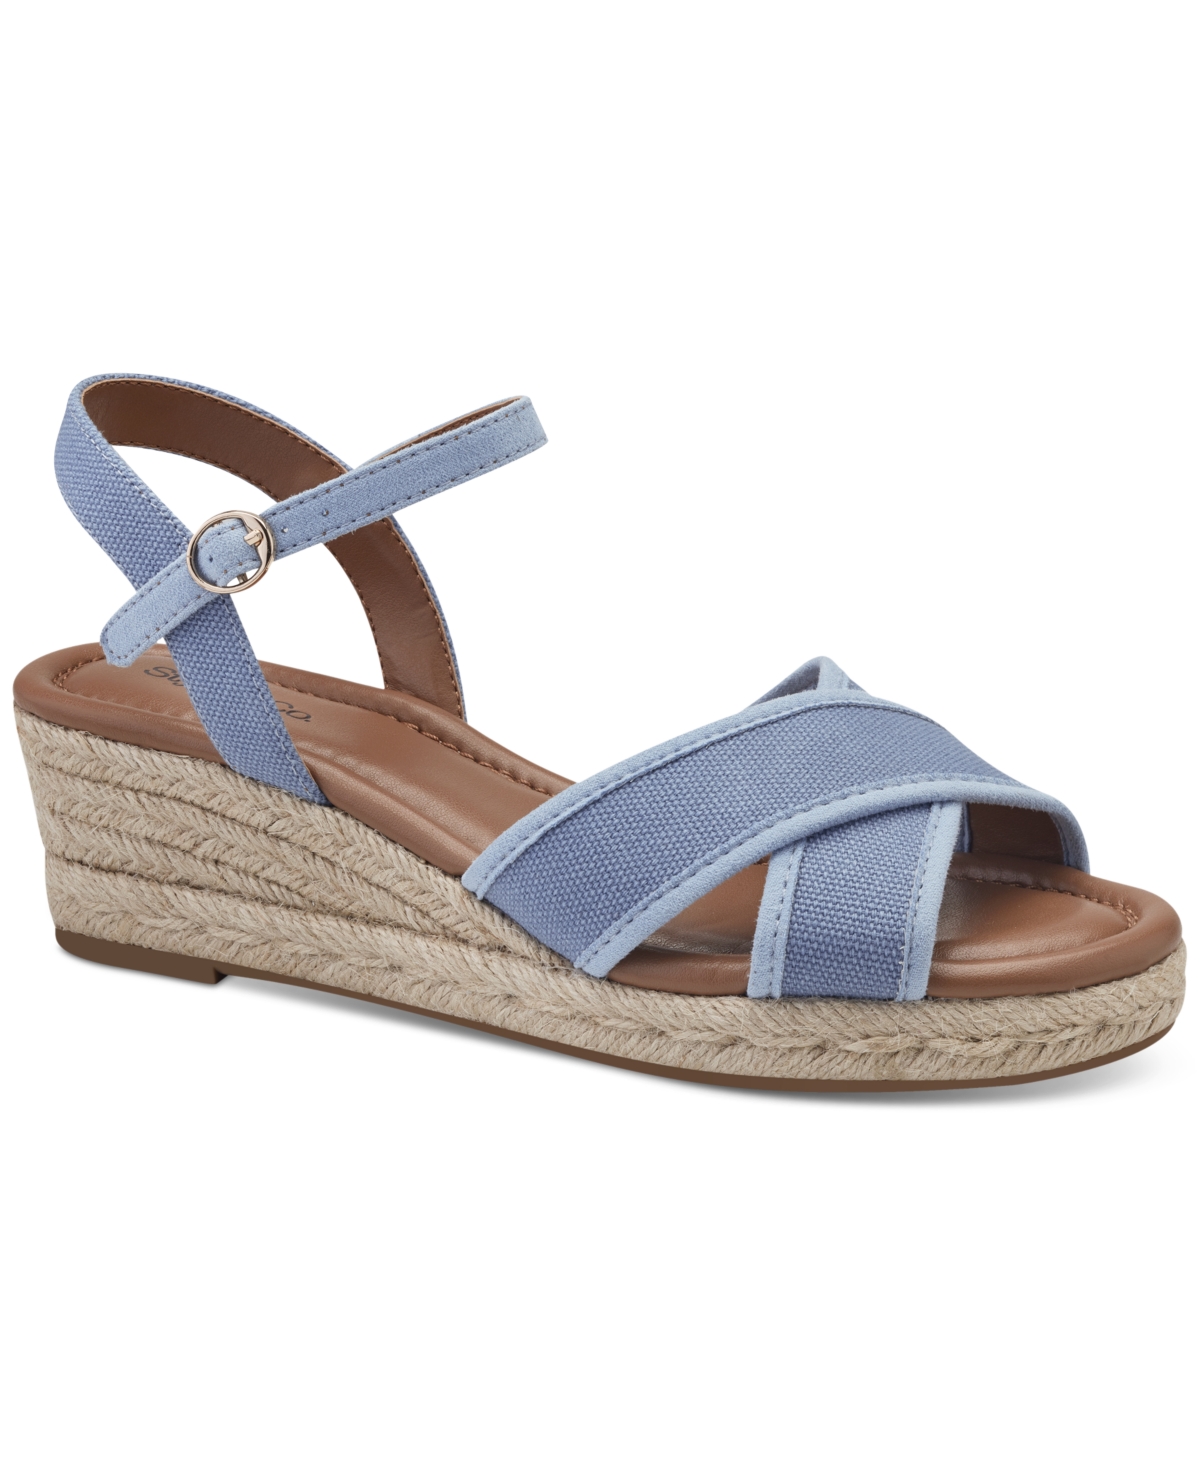 Leahh Strappy Espadrille Wedge Sandals, Created for Macy's - Light Gold